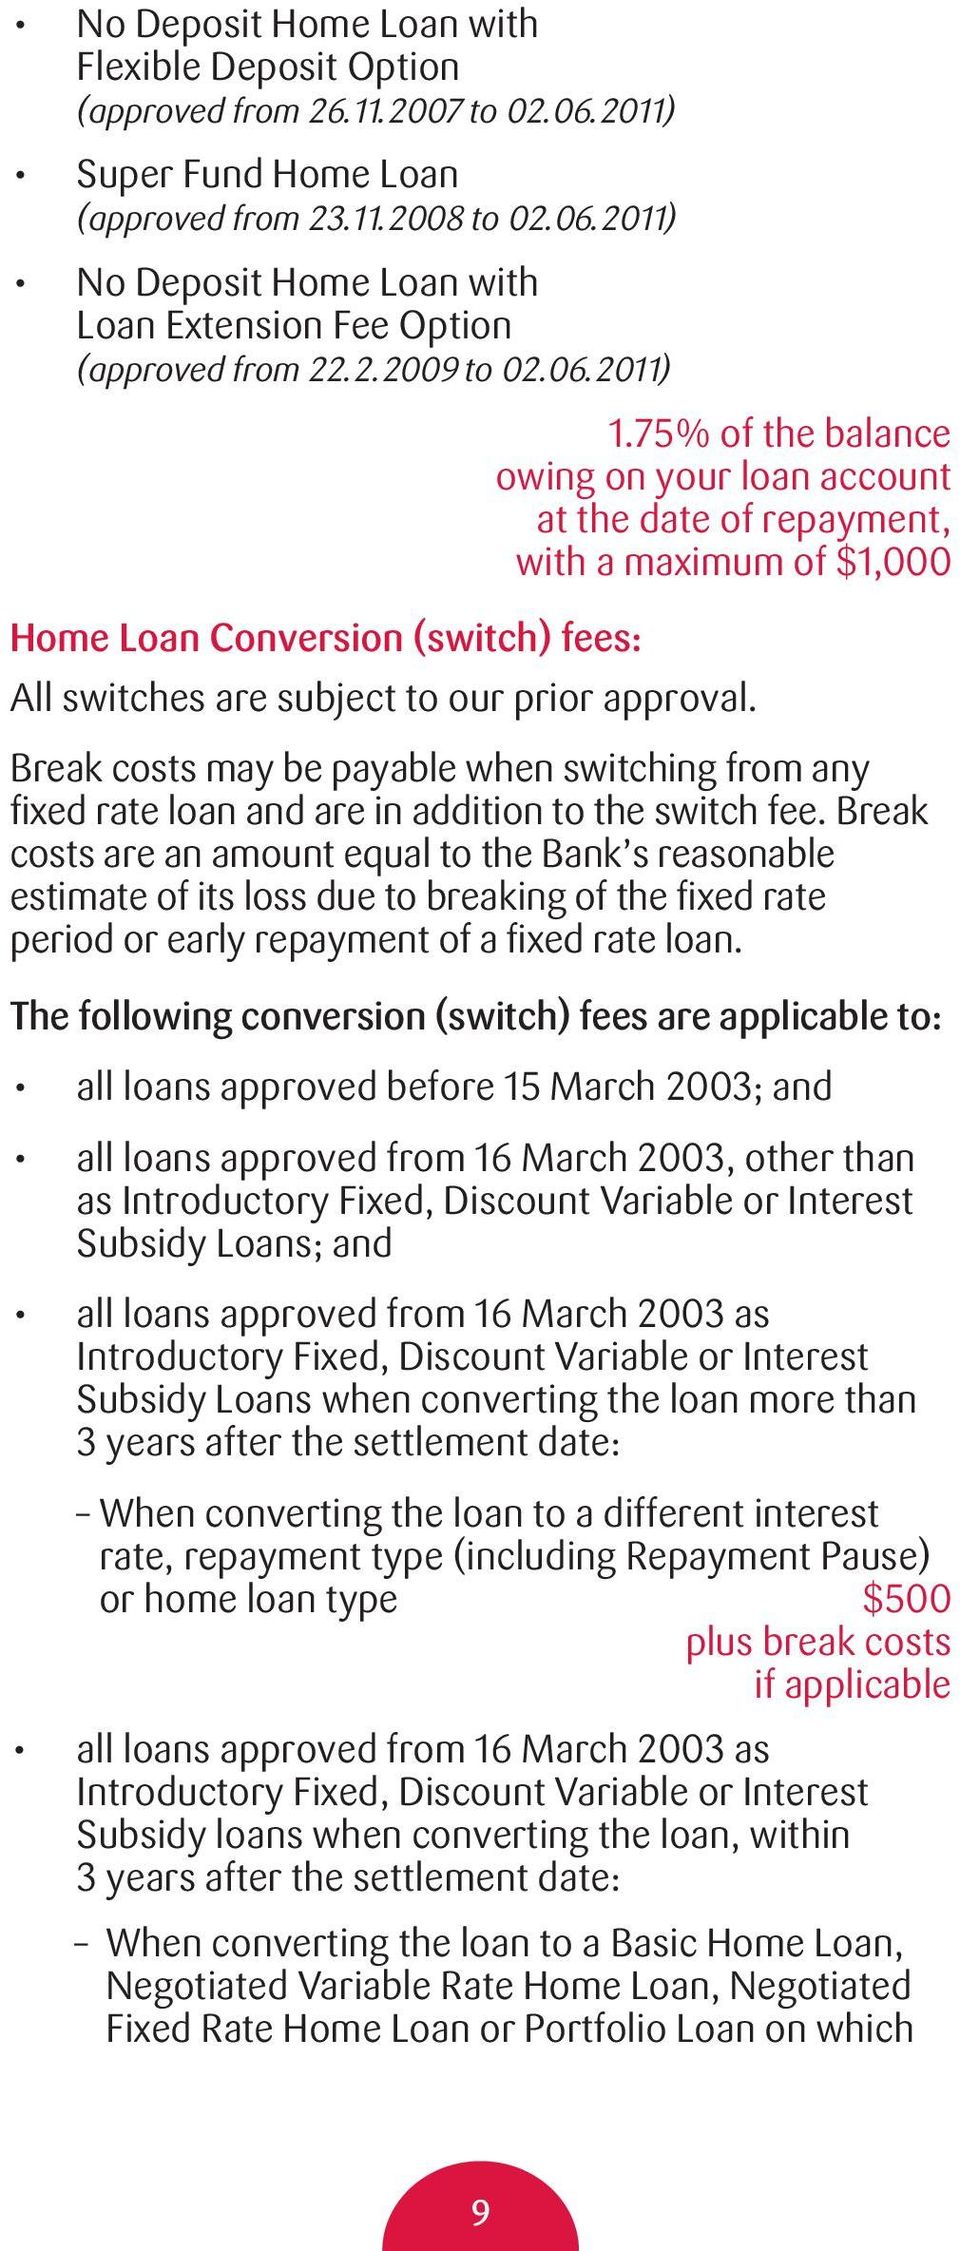 75% of the balance owing on your loan account at the date of repayment, with a maximum of $1,000 Home Loan Conversion (switch) fees: All switches are subject to our prior approval.